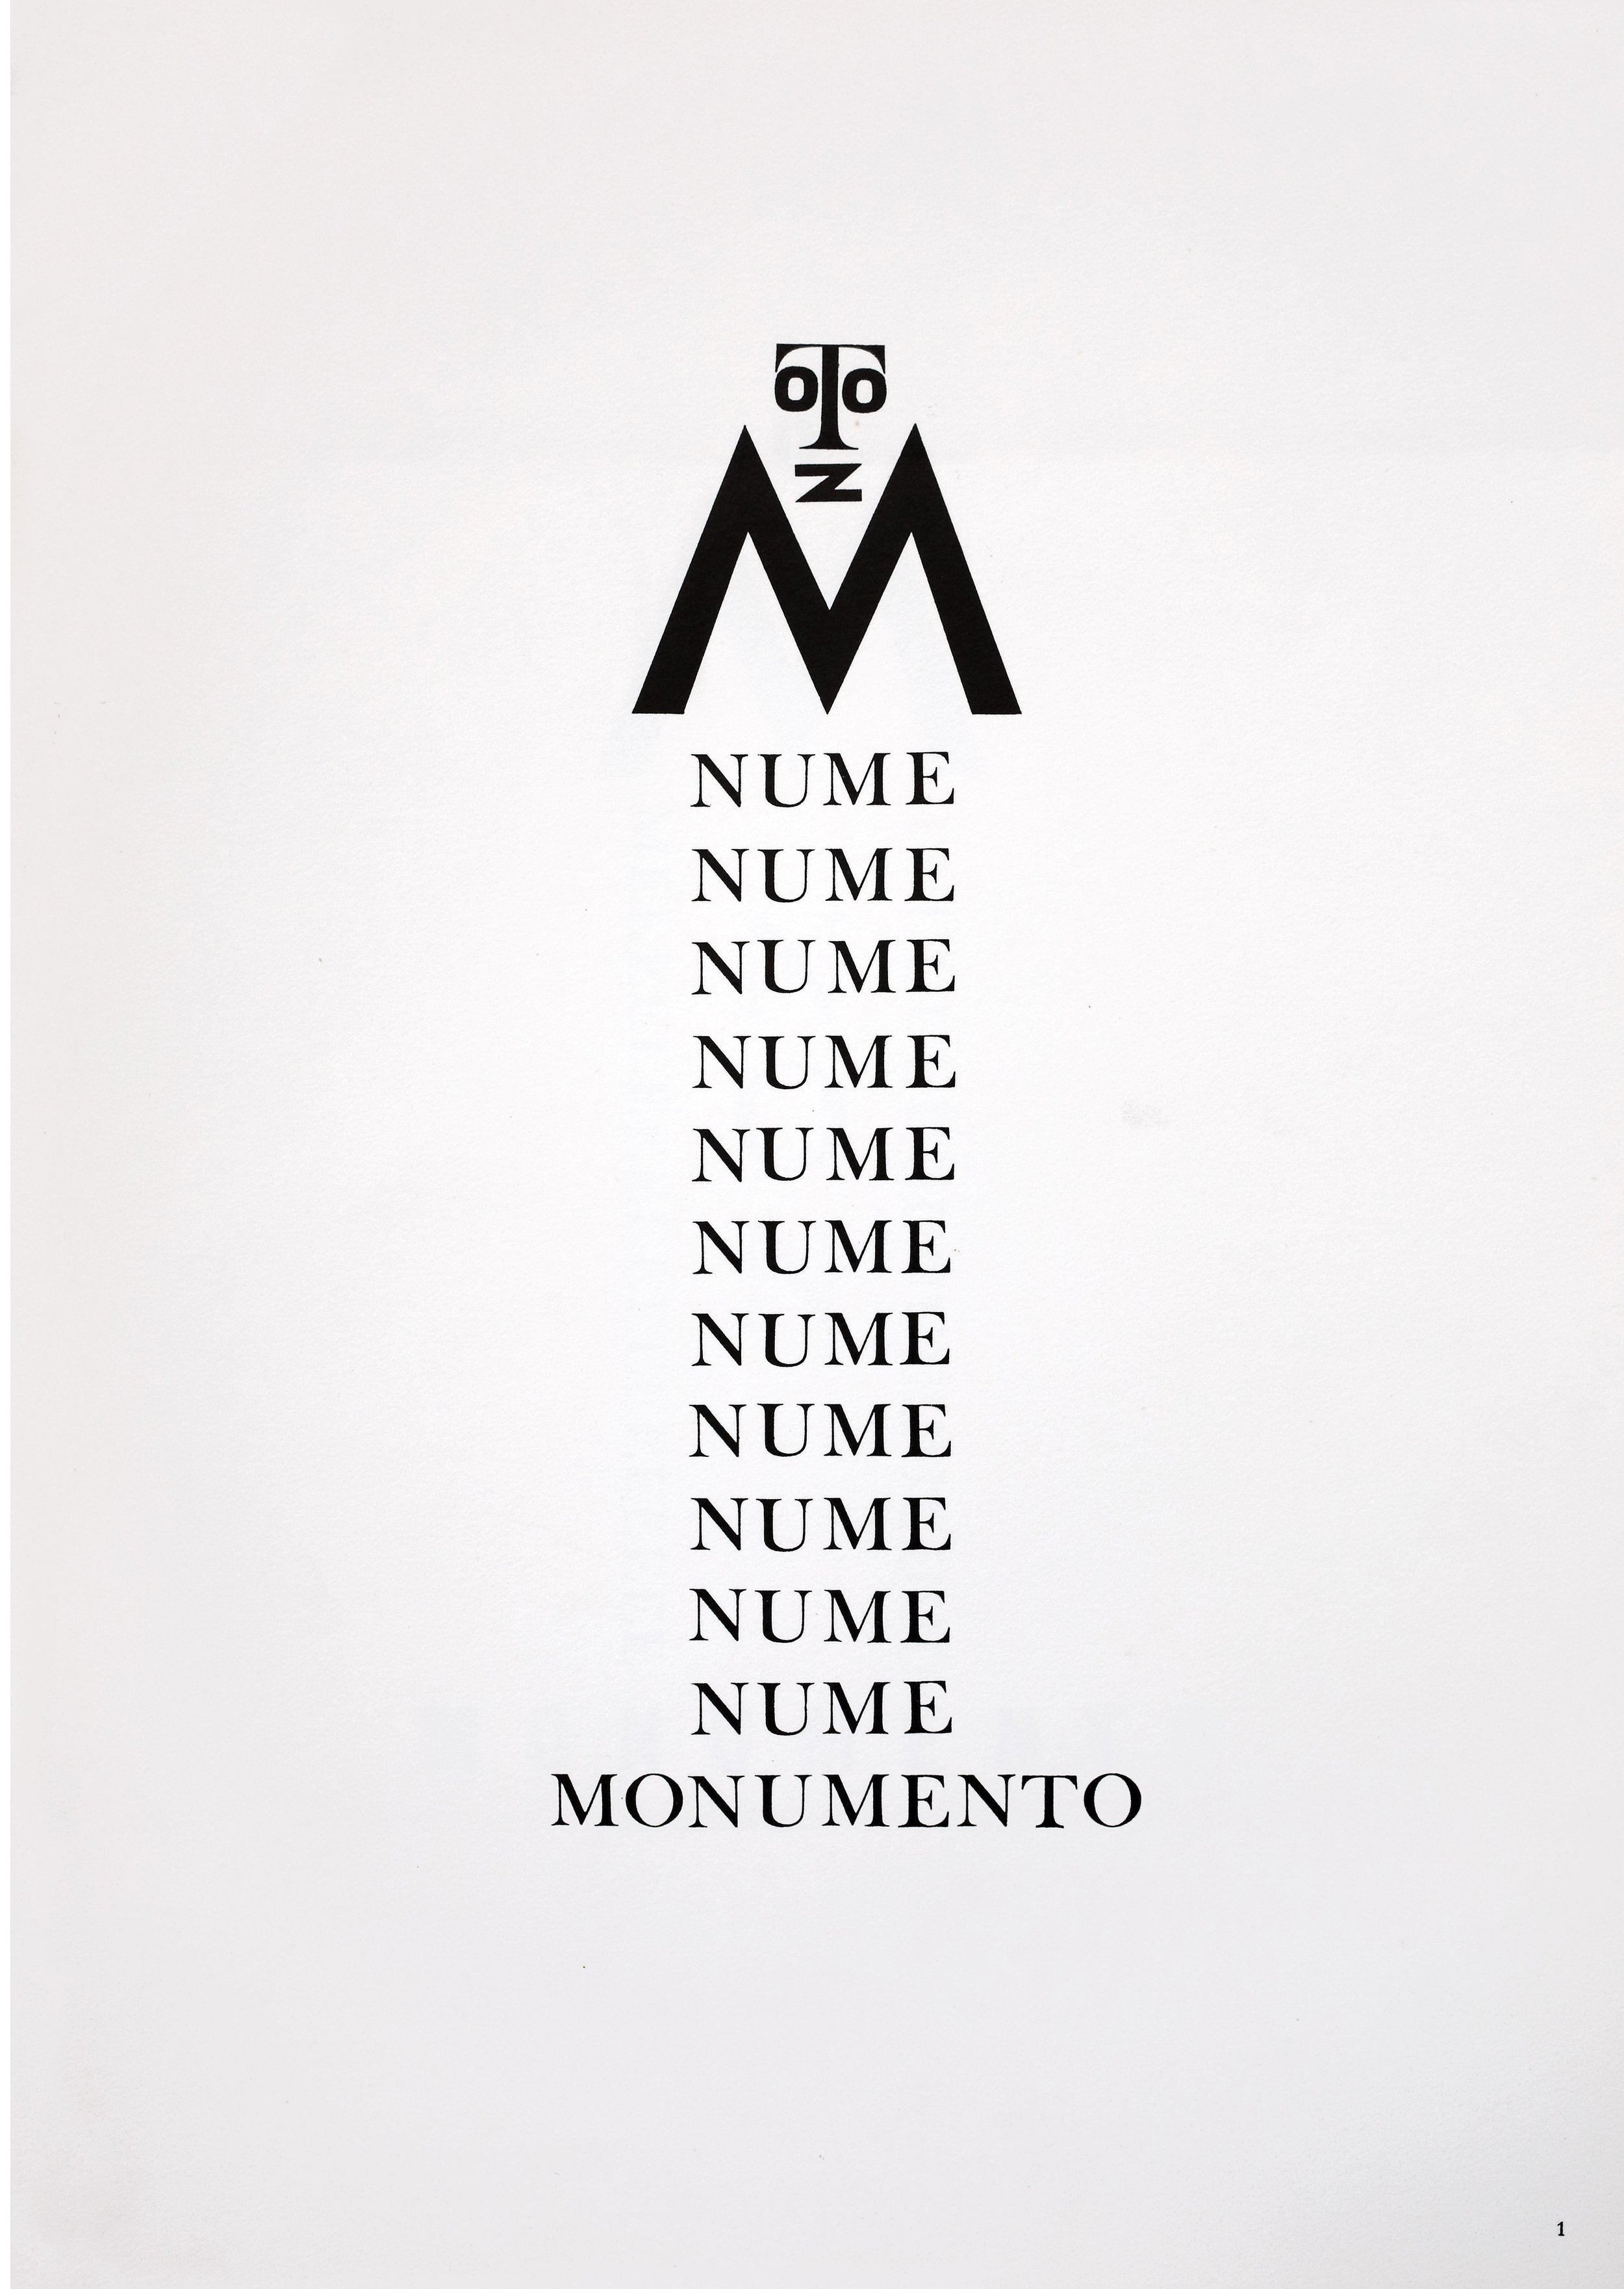 History of Monument, 1968
Published by De Luca, Rome
Six pages of offset lithographs on paper